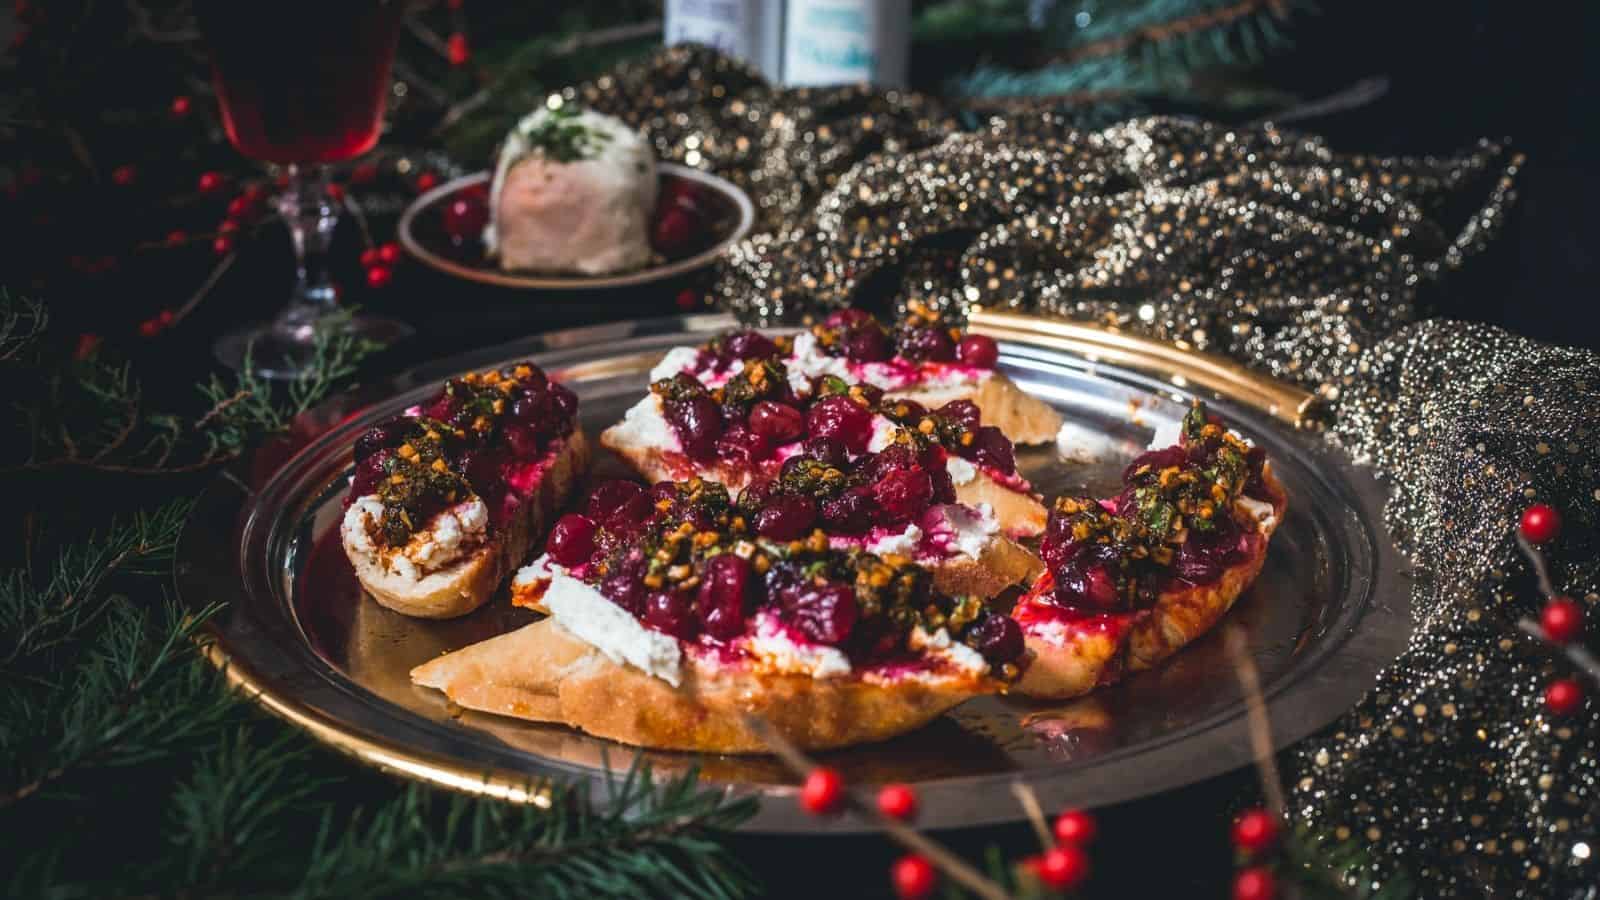 Cranberry and pistachio crostini on a plate.